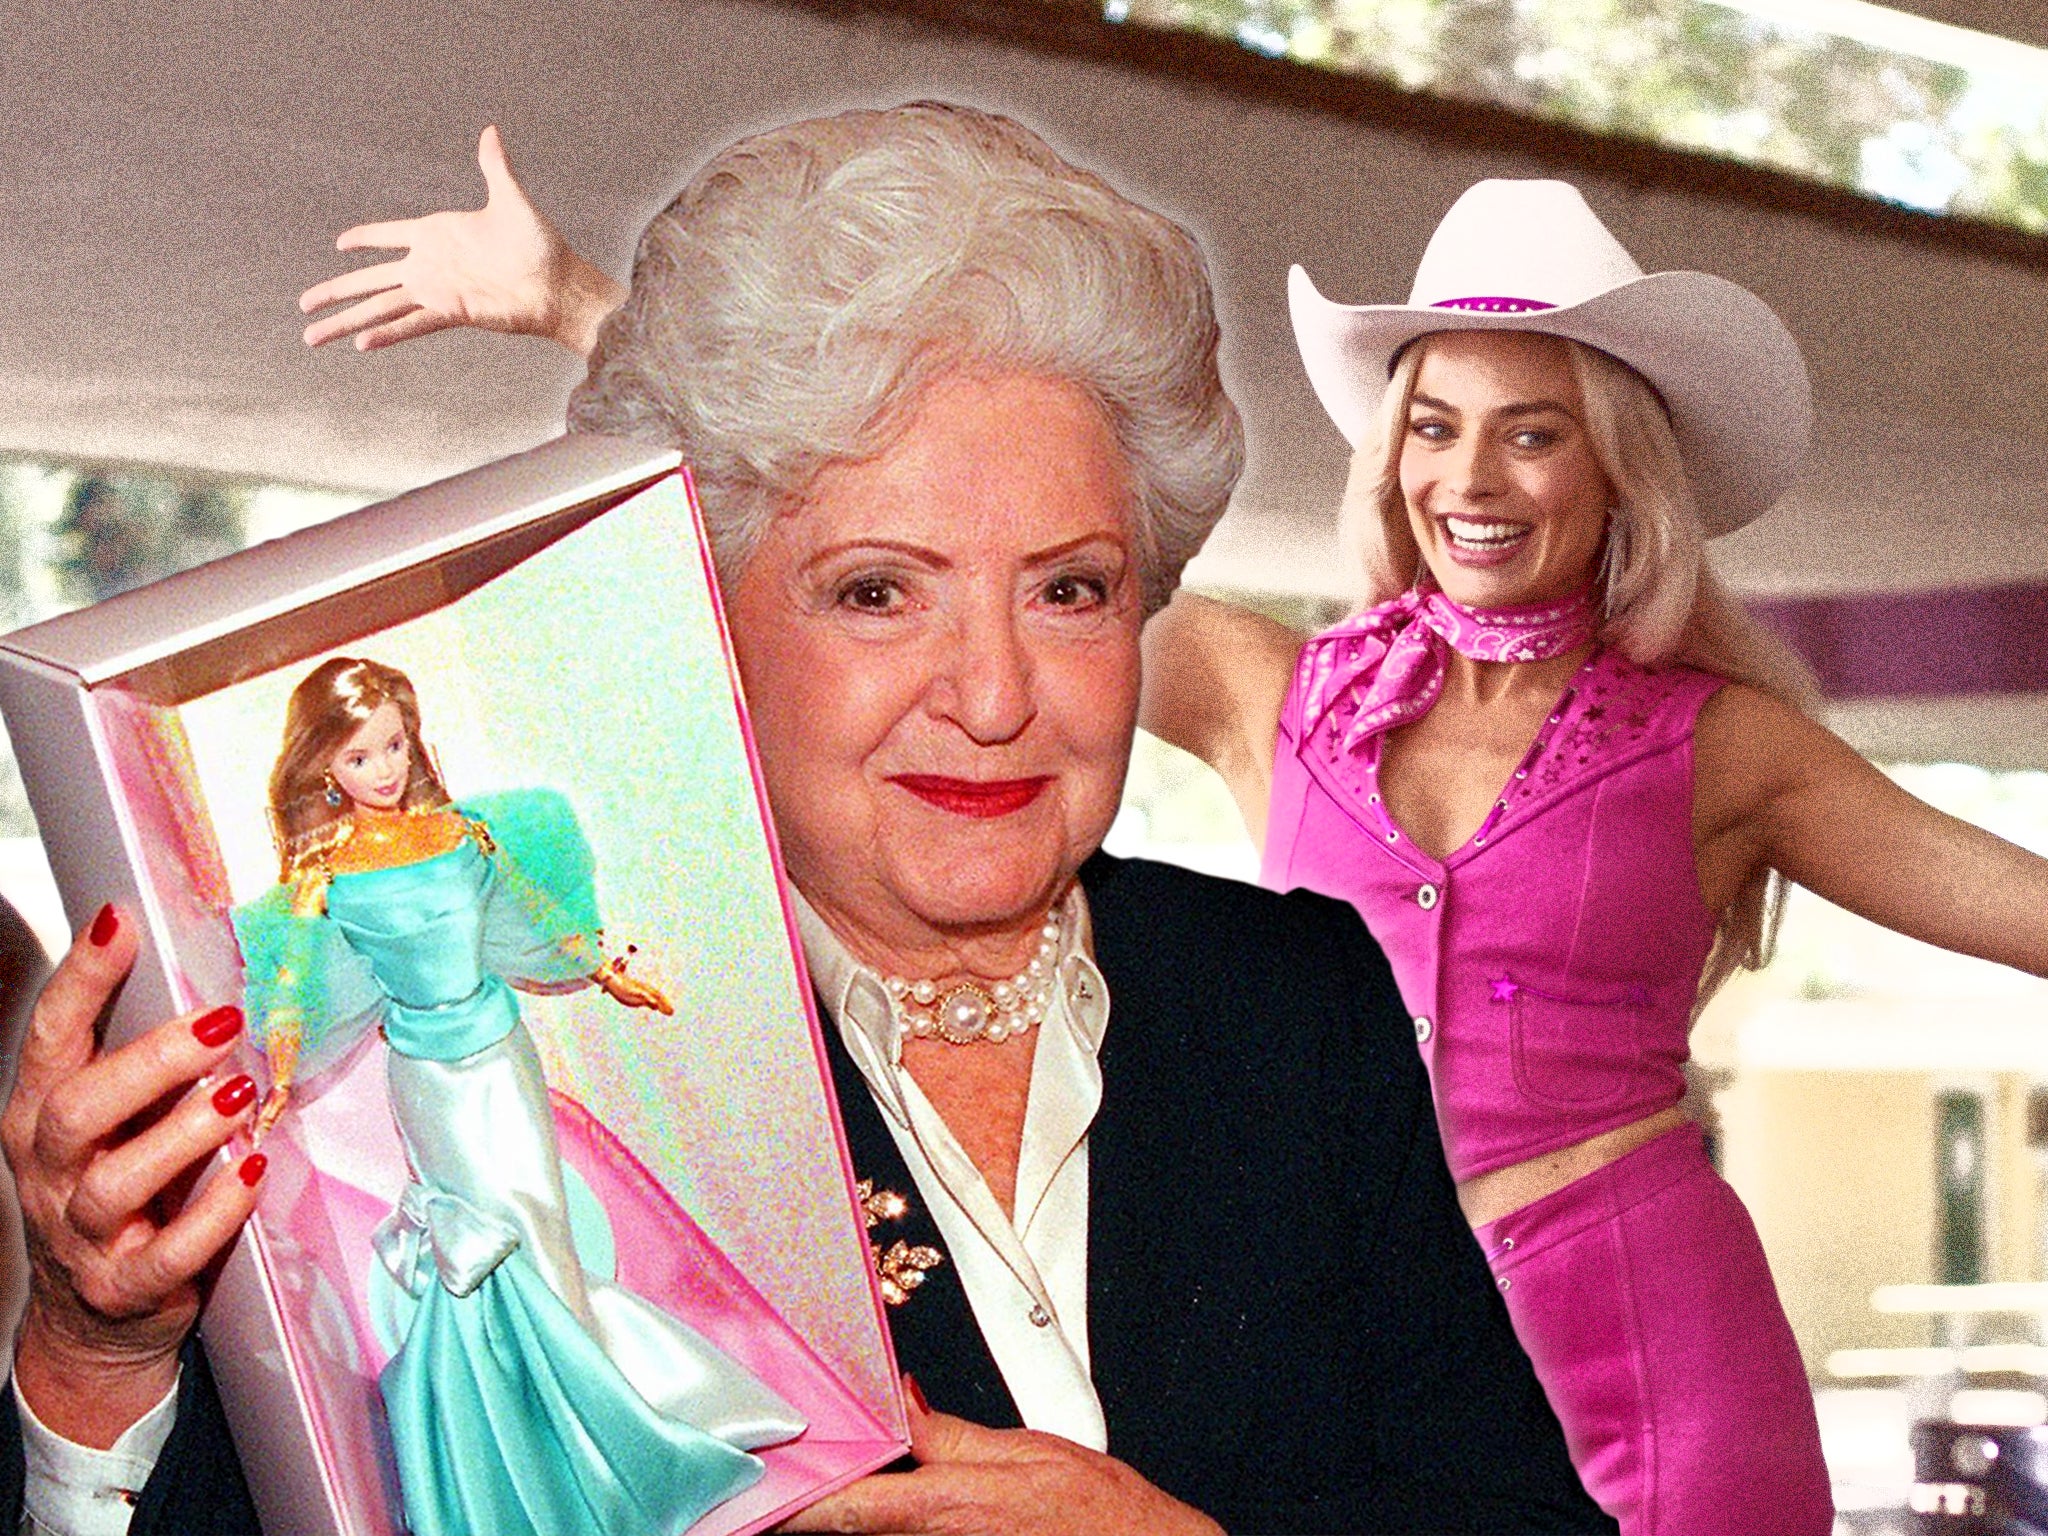 <p>‘Somehow, my life has revolved around breasts’: Barbie inventor Ruth Handler in 1999, and Margot Robbie in the new ‘Barbie’ movie</p>